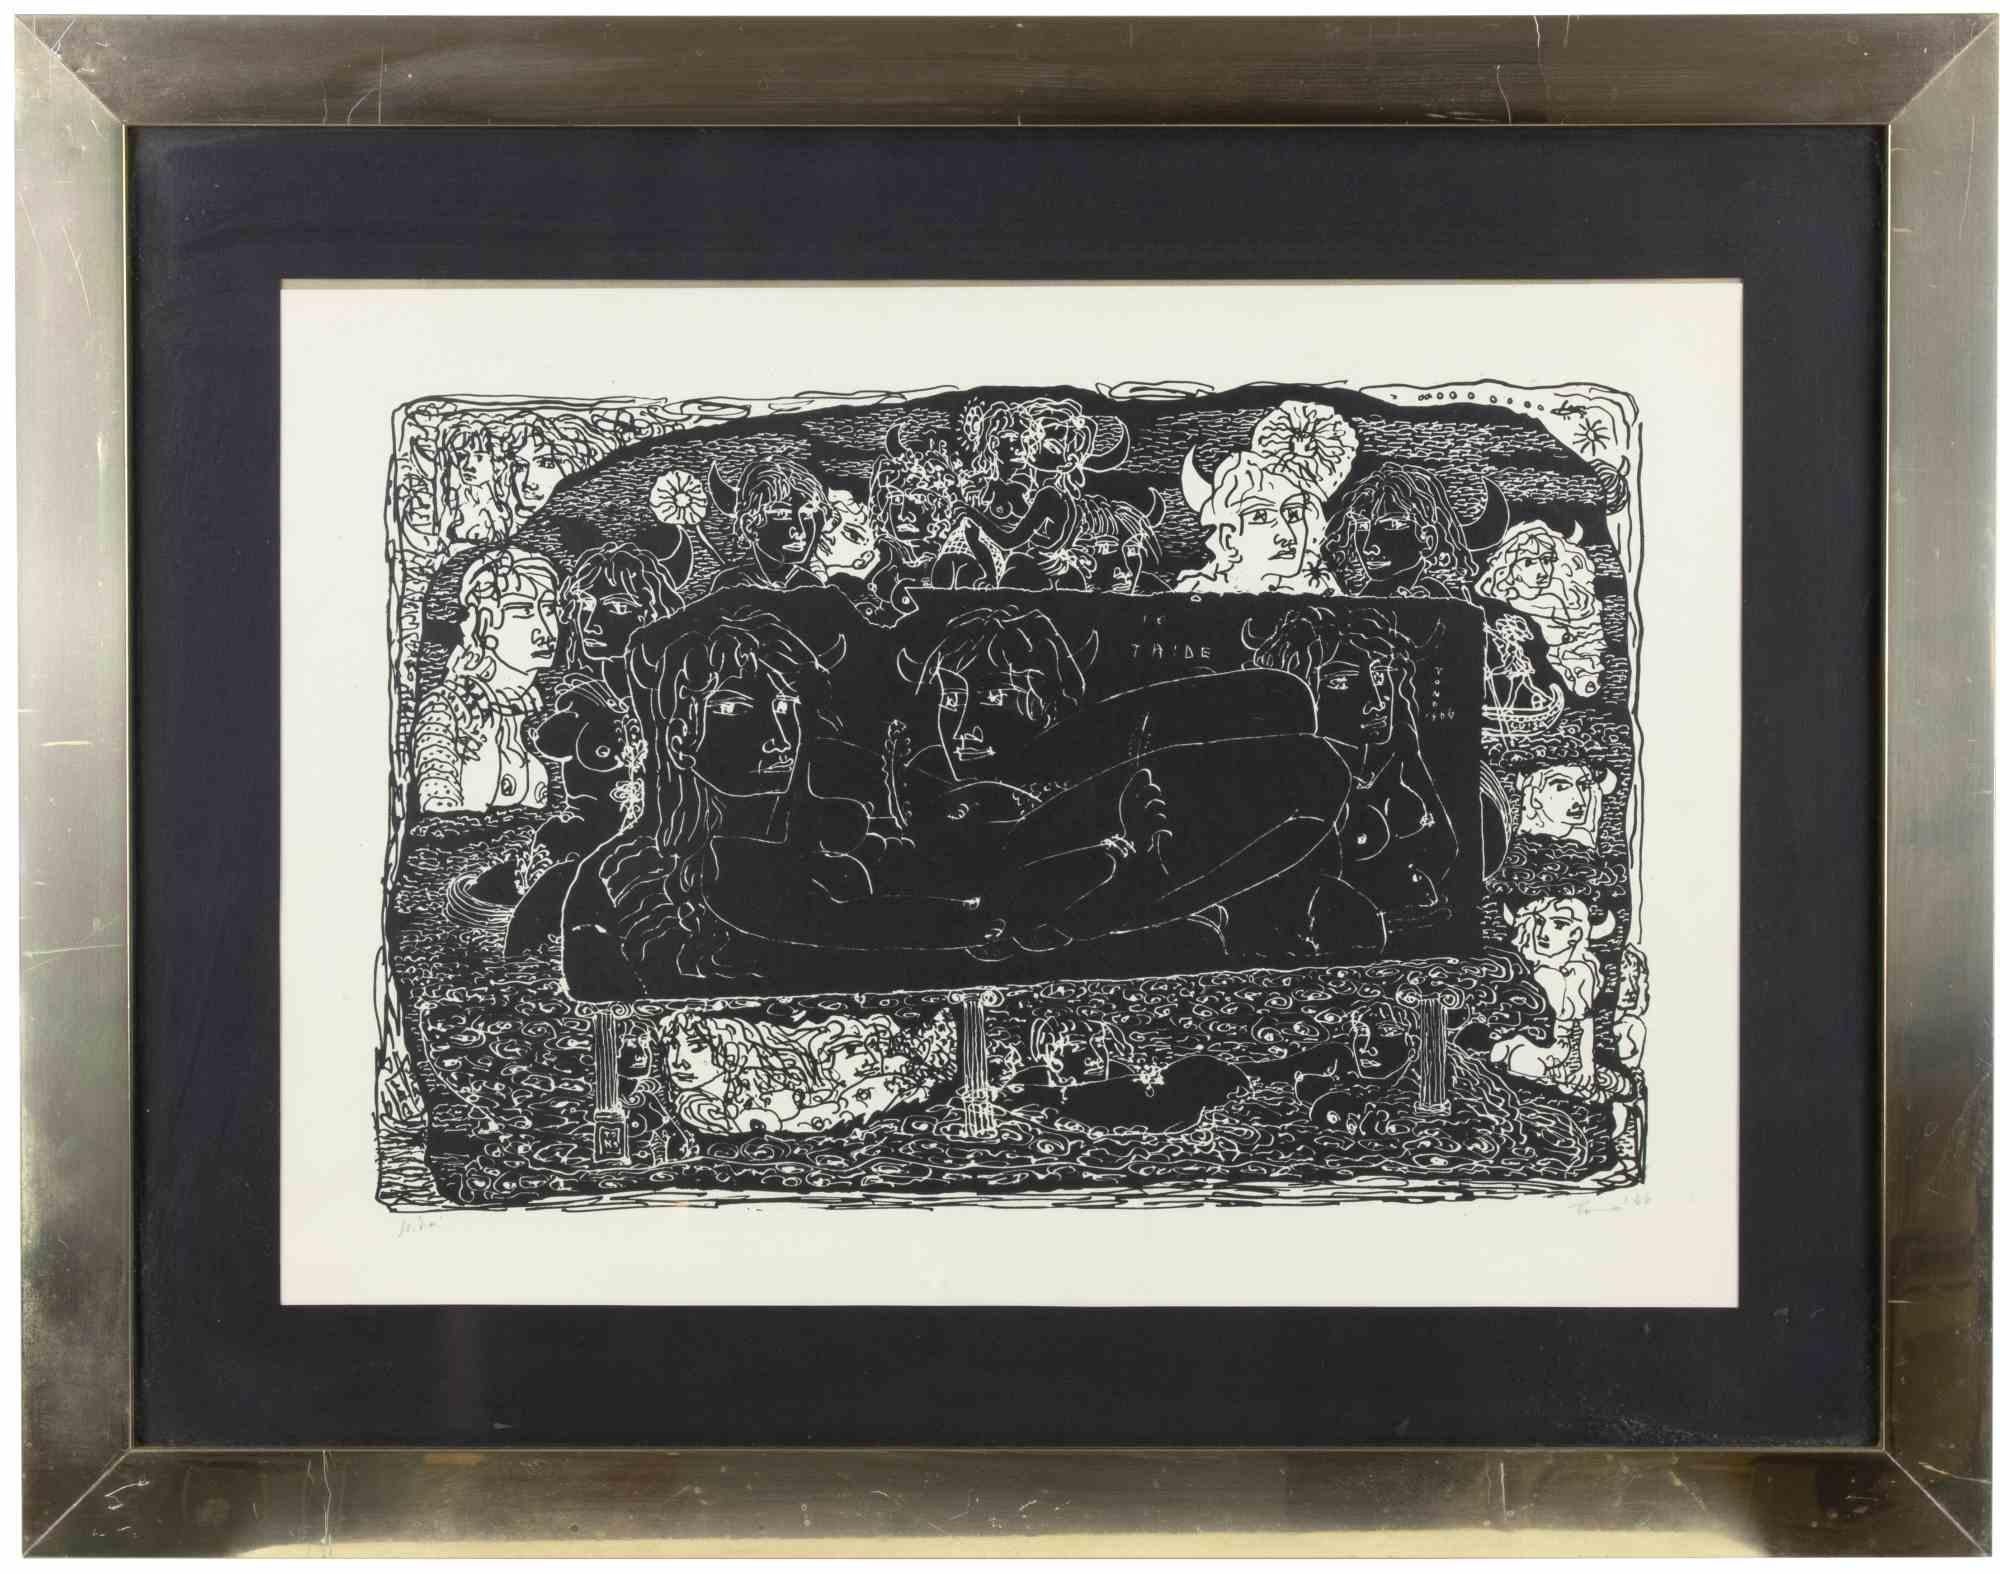 Untitled is a modern artwork realized by Tono Zancanaro in 1966.

Black and white lithograph.

Hand signed and dated on the lower margin.

Artist's proof (as reported on the lower margin).